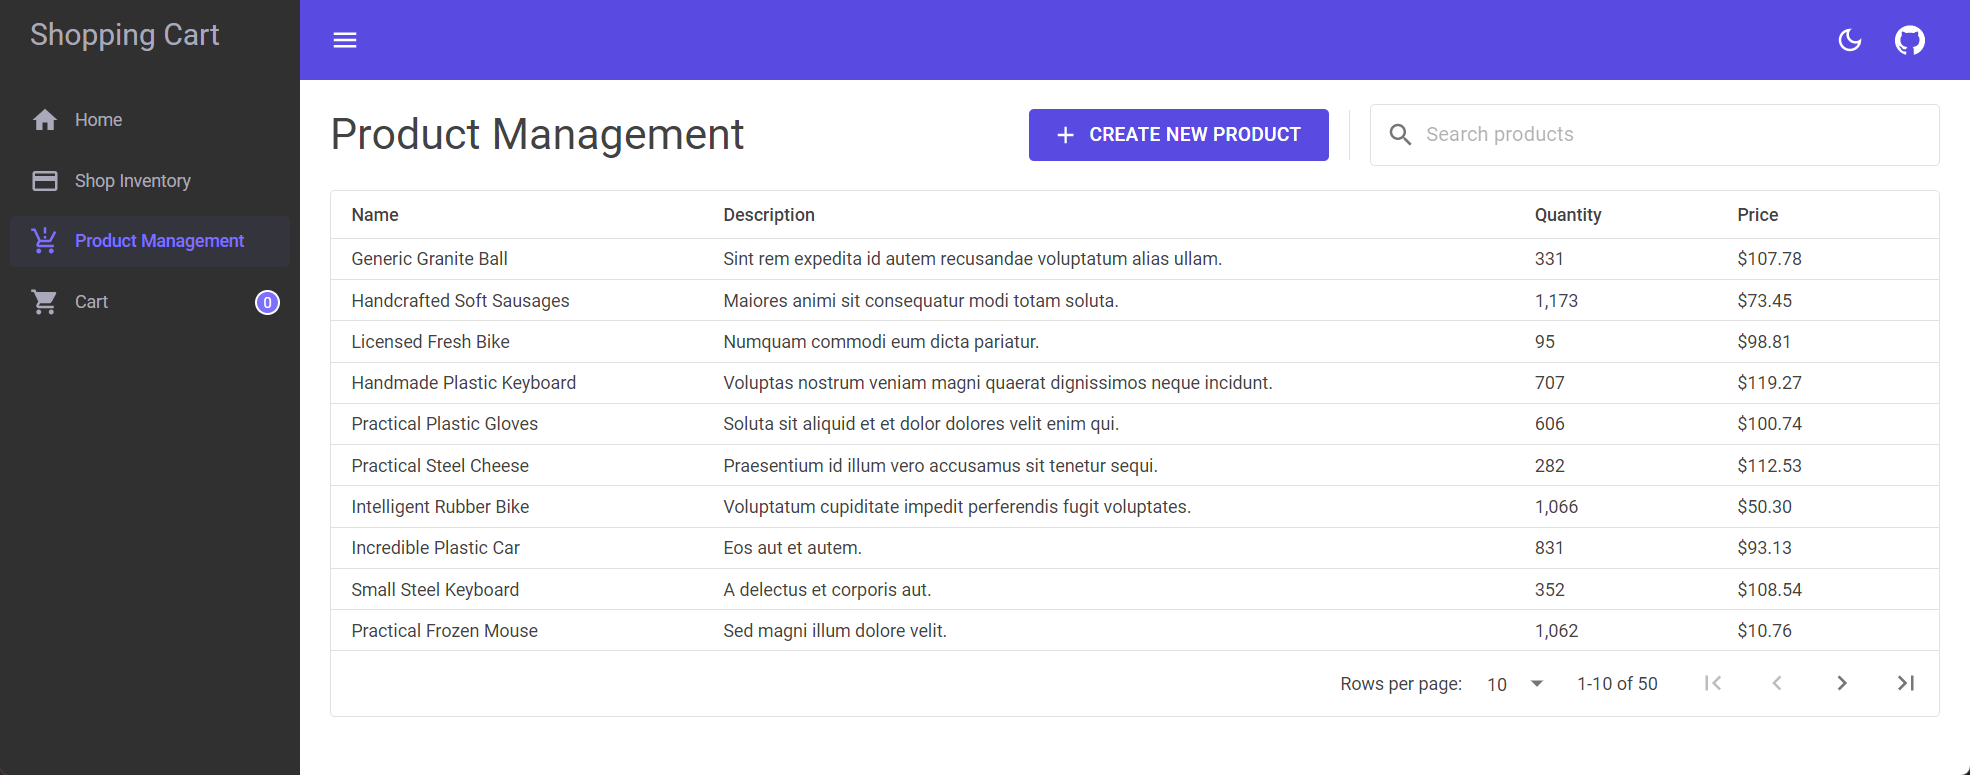 Orleans: Shopping Cart sample app, product management page.